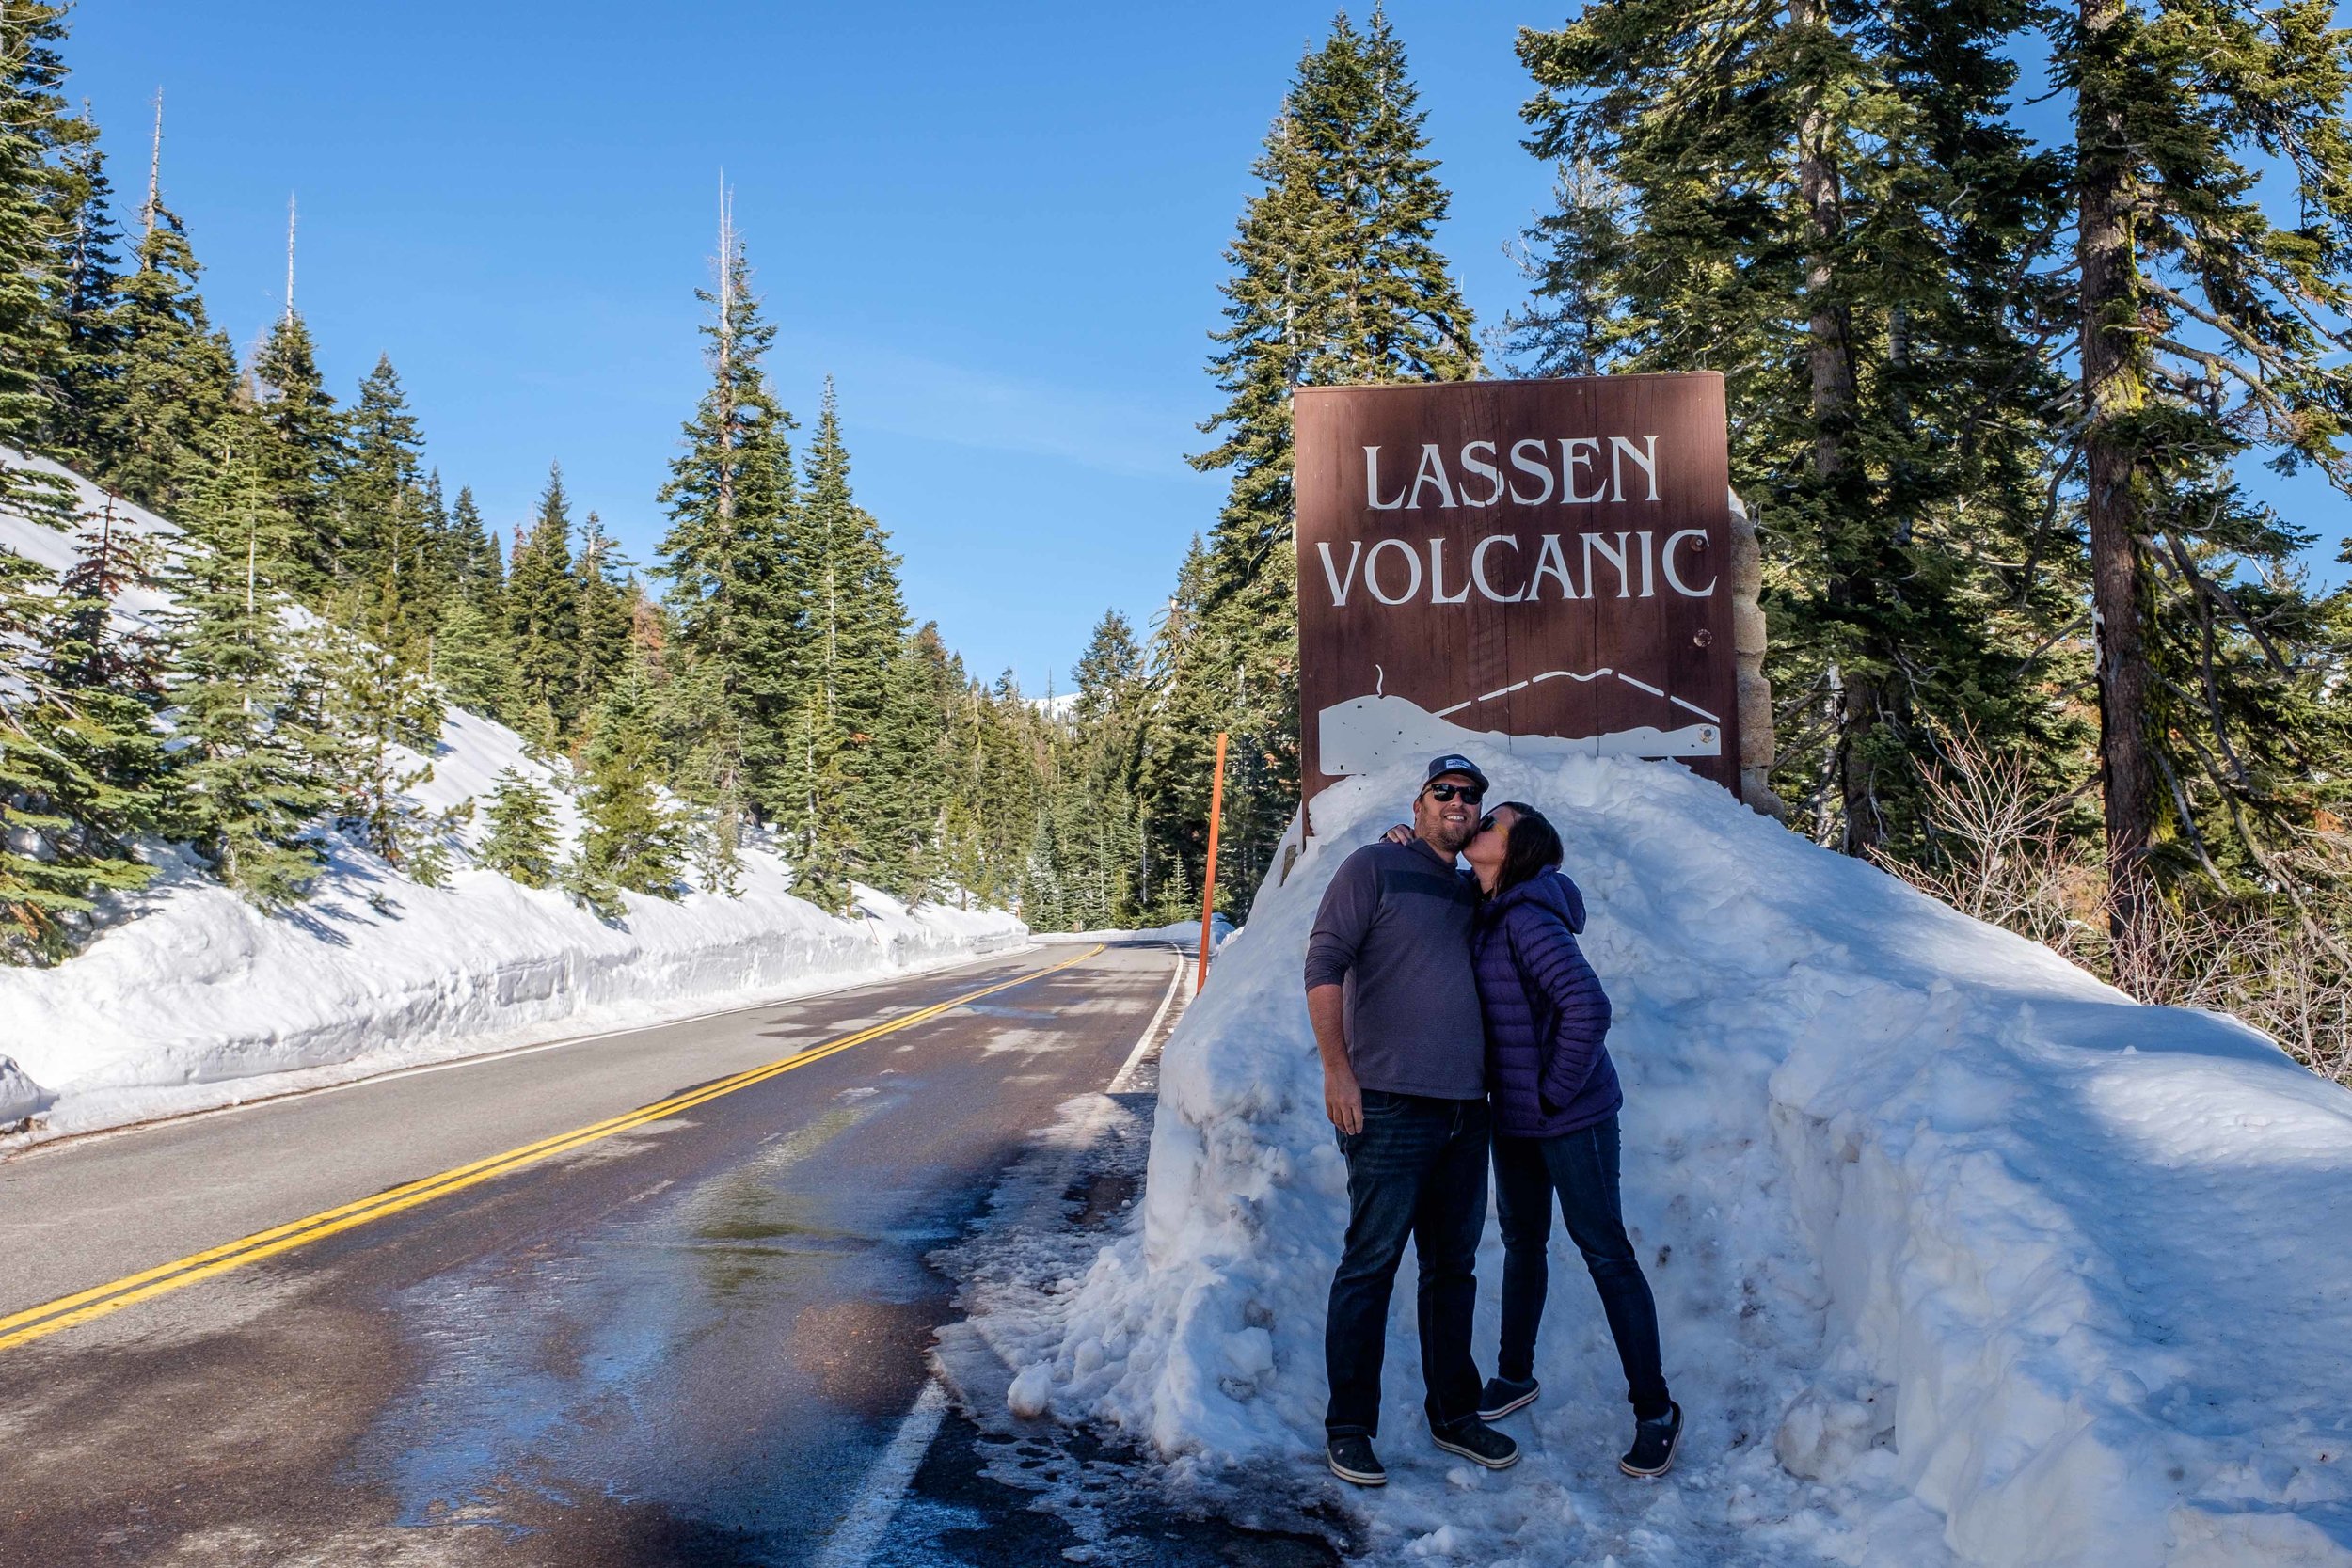 Things To Do - Lassen Volcanic National Park (U.S. National Park Service)